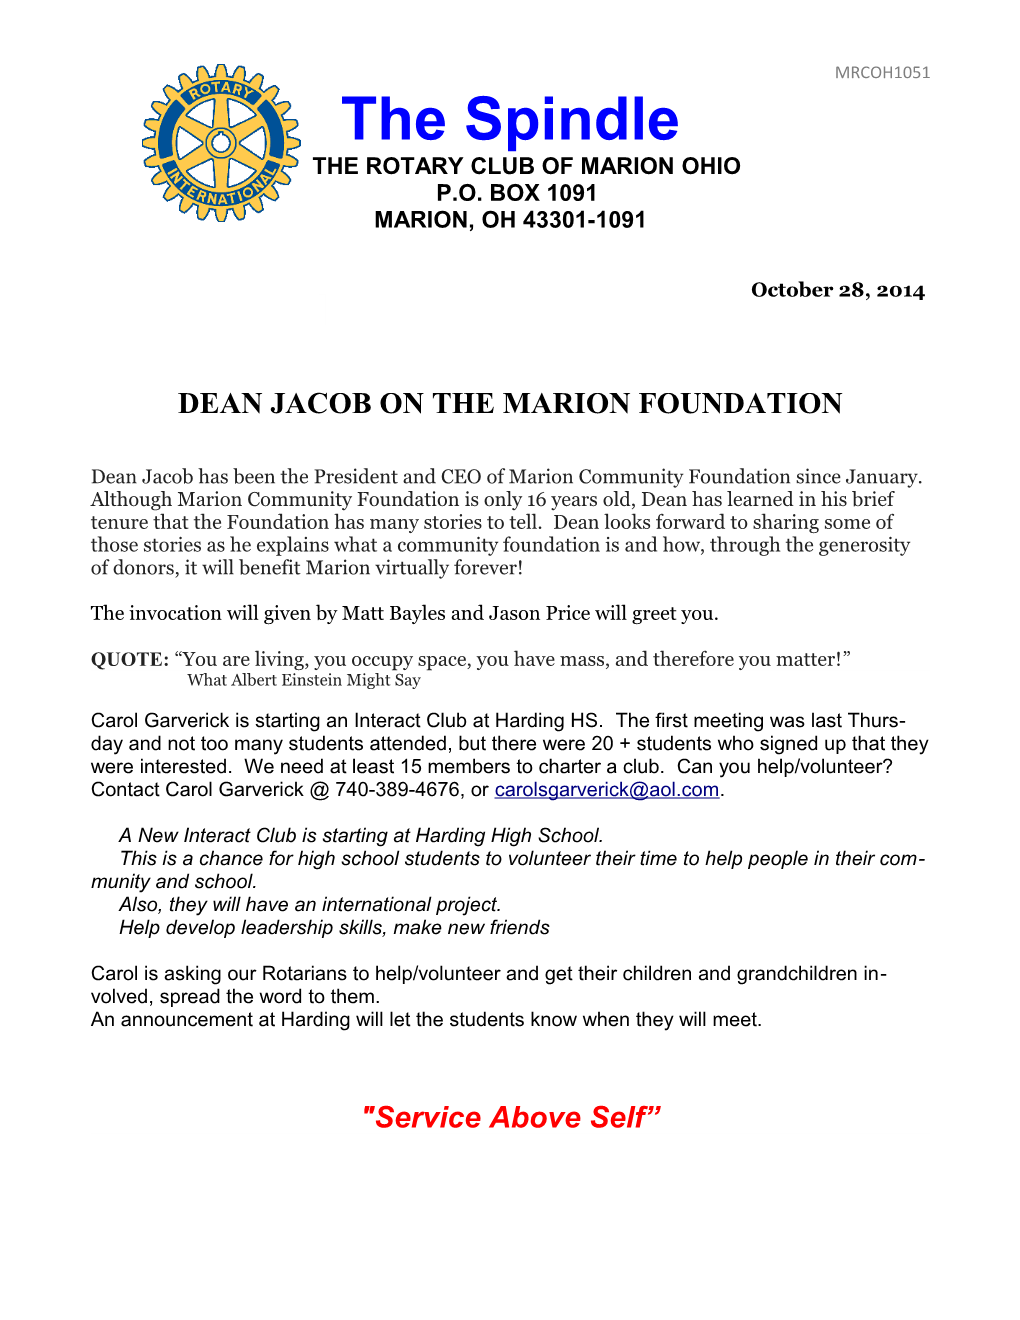 Dean Jacob on the Marion Foundation